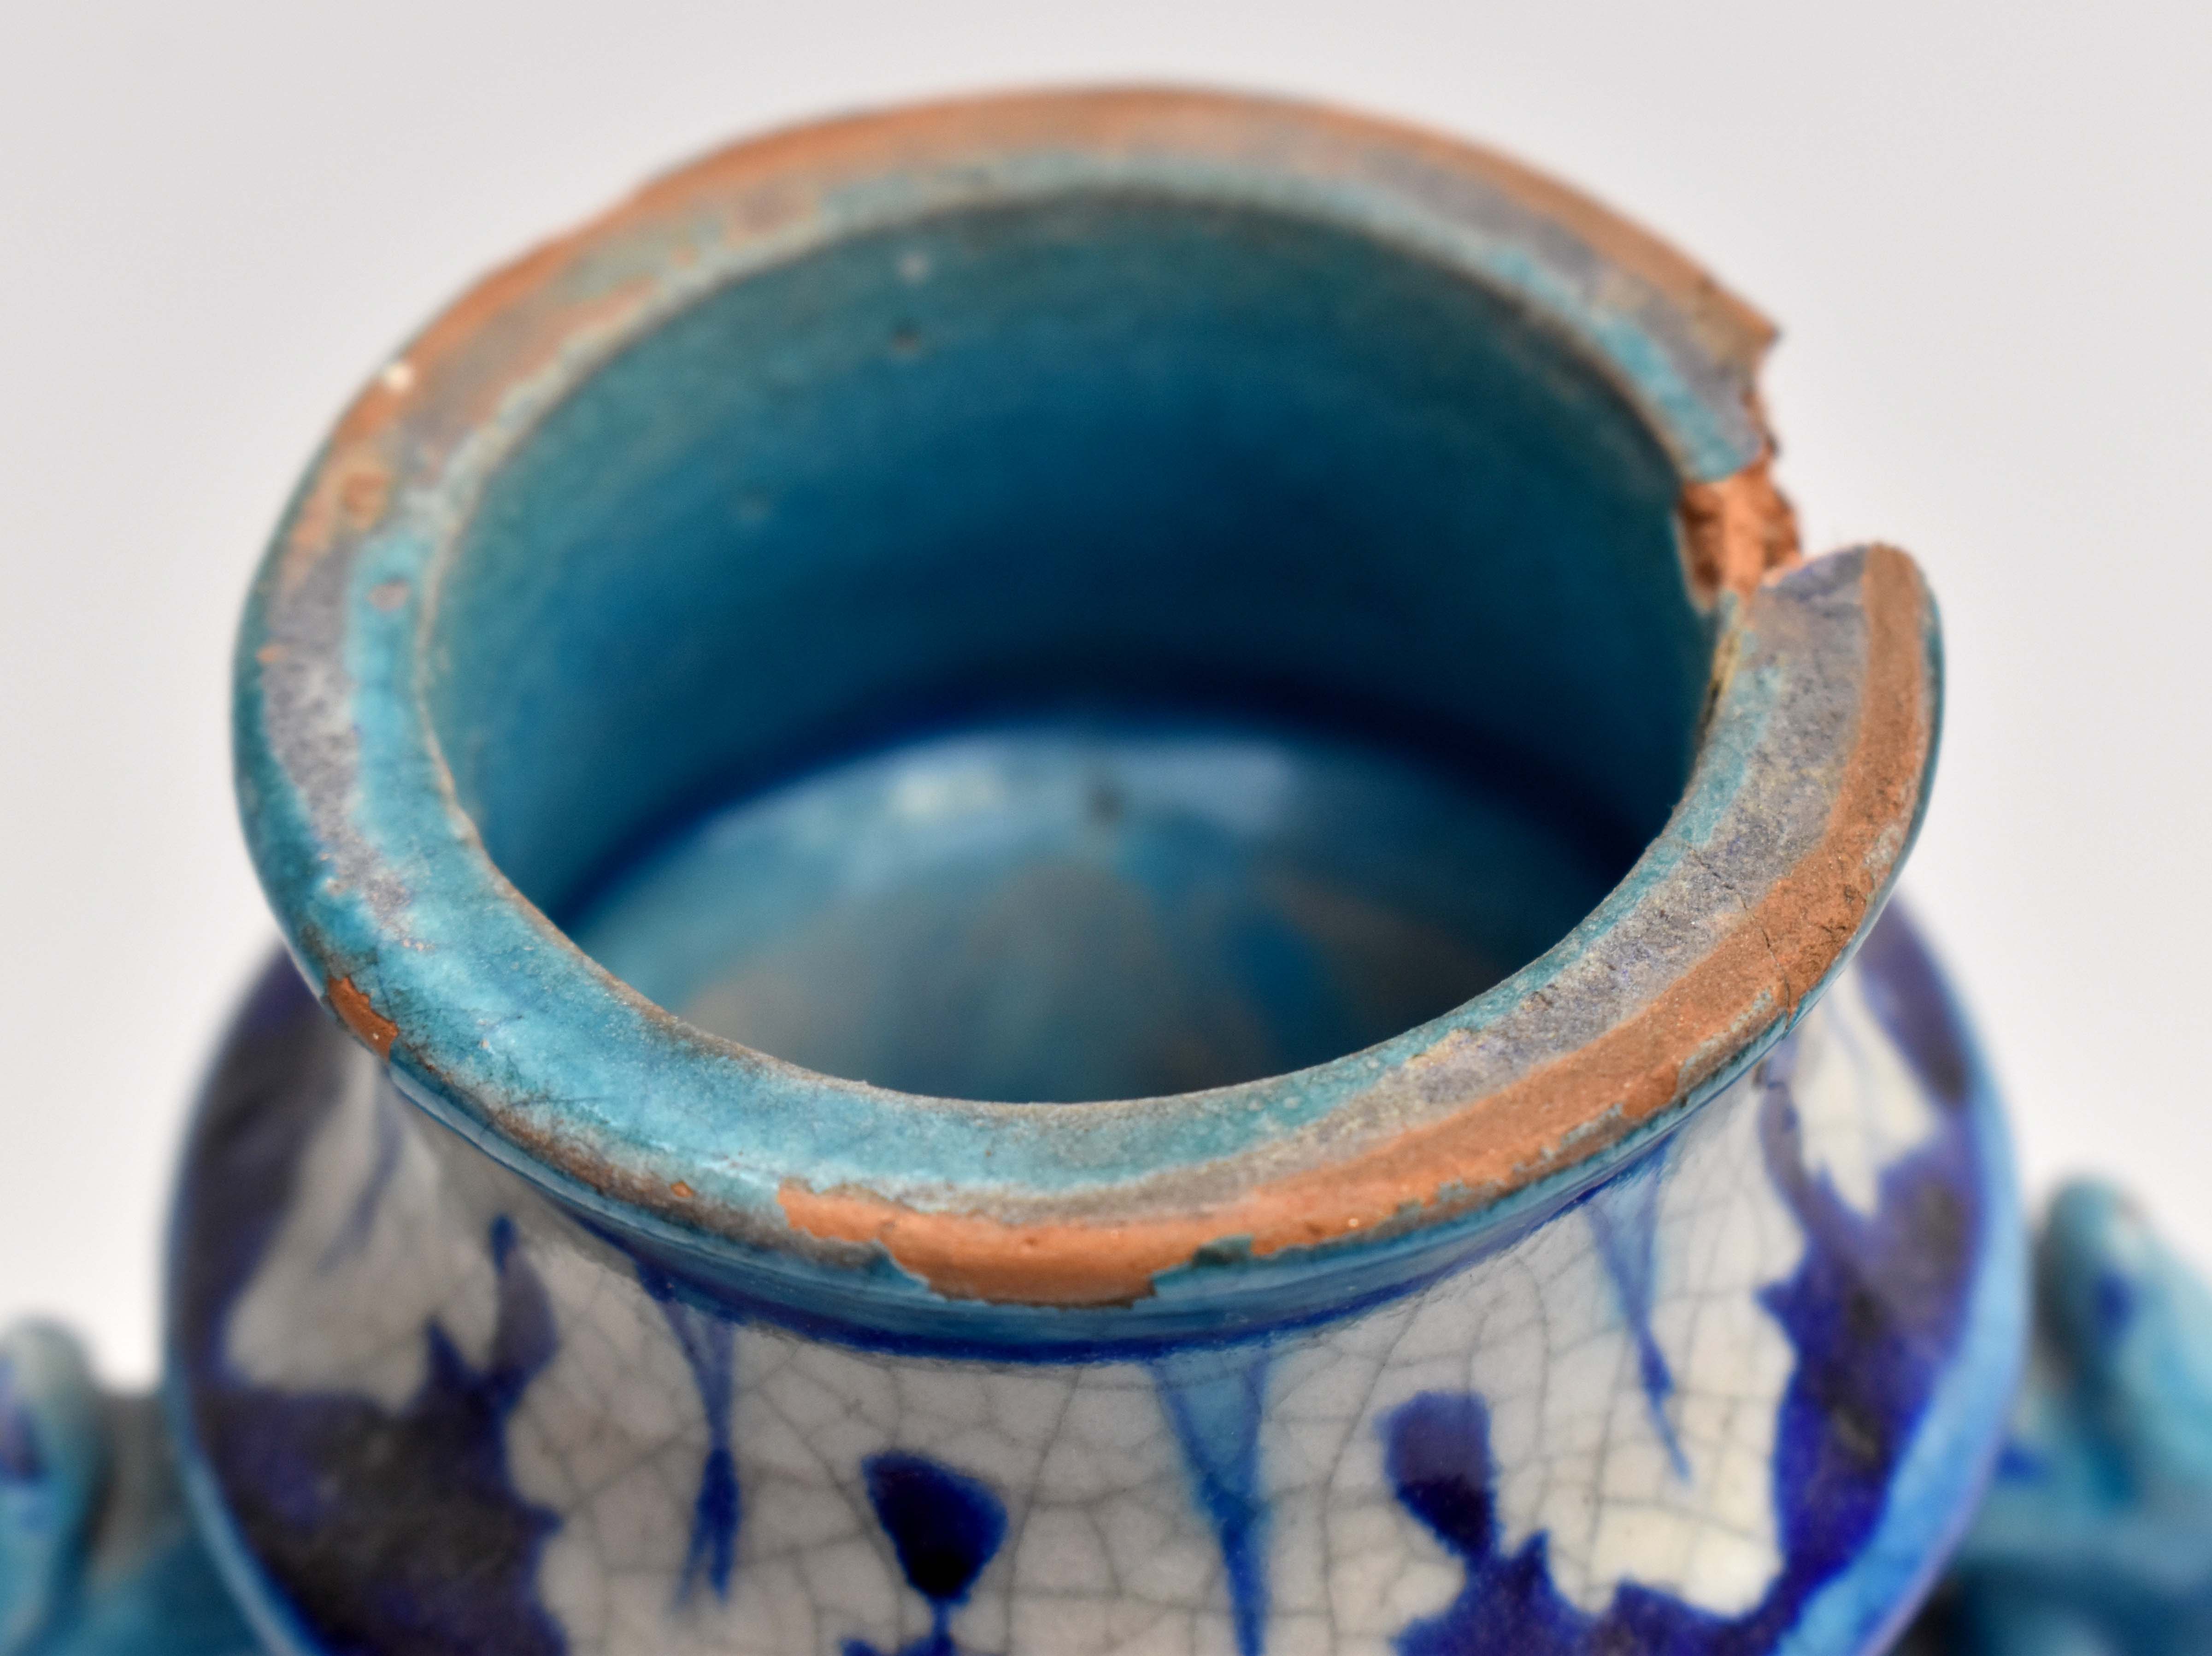 19th Century Islamic blue and turquoise vase with hole through the centre - Image 4 of 4